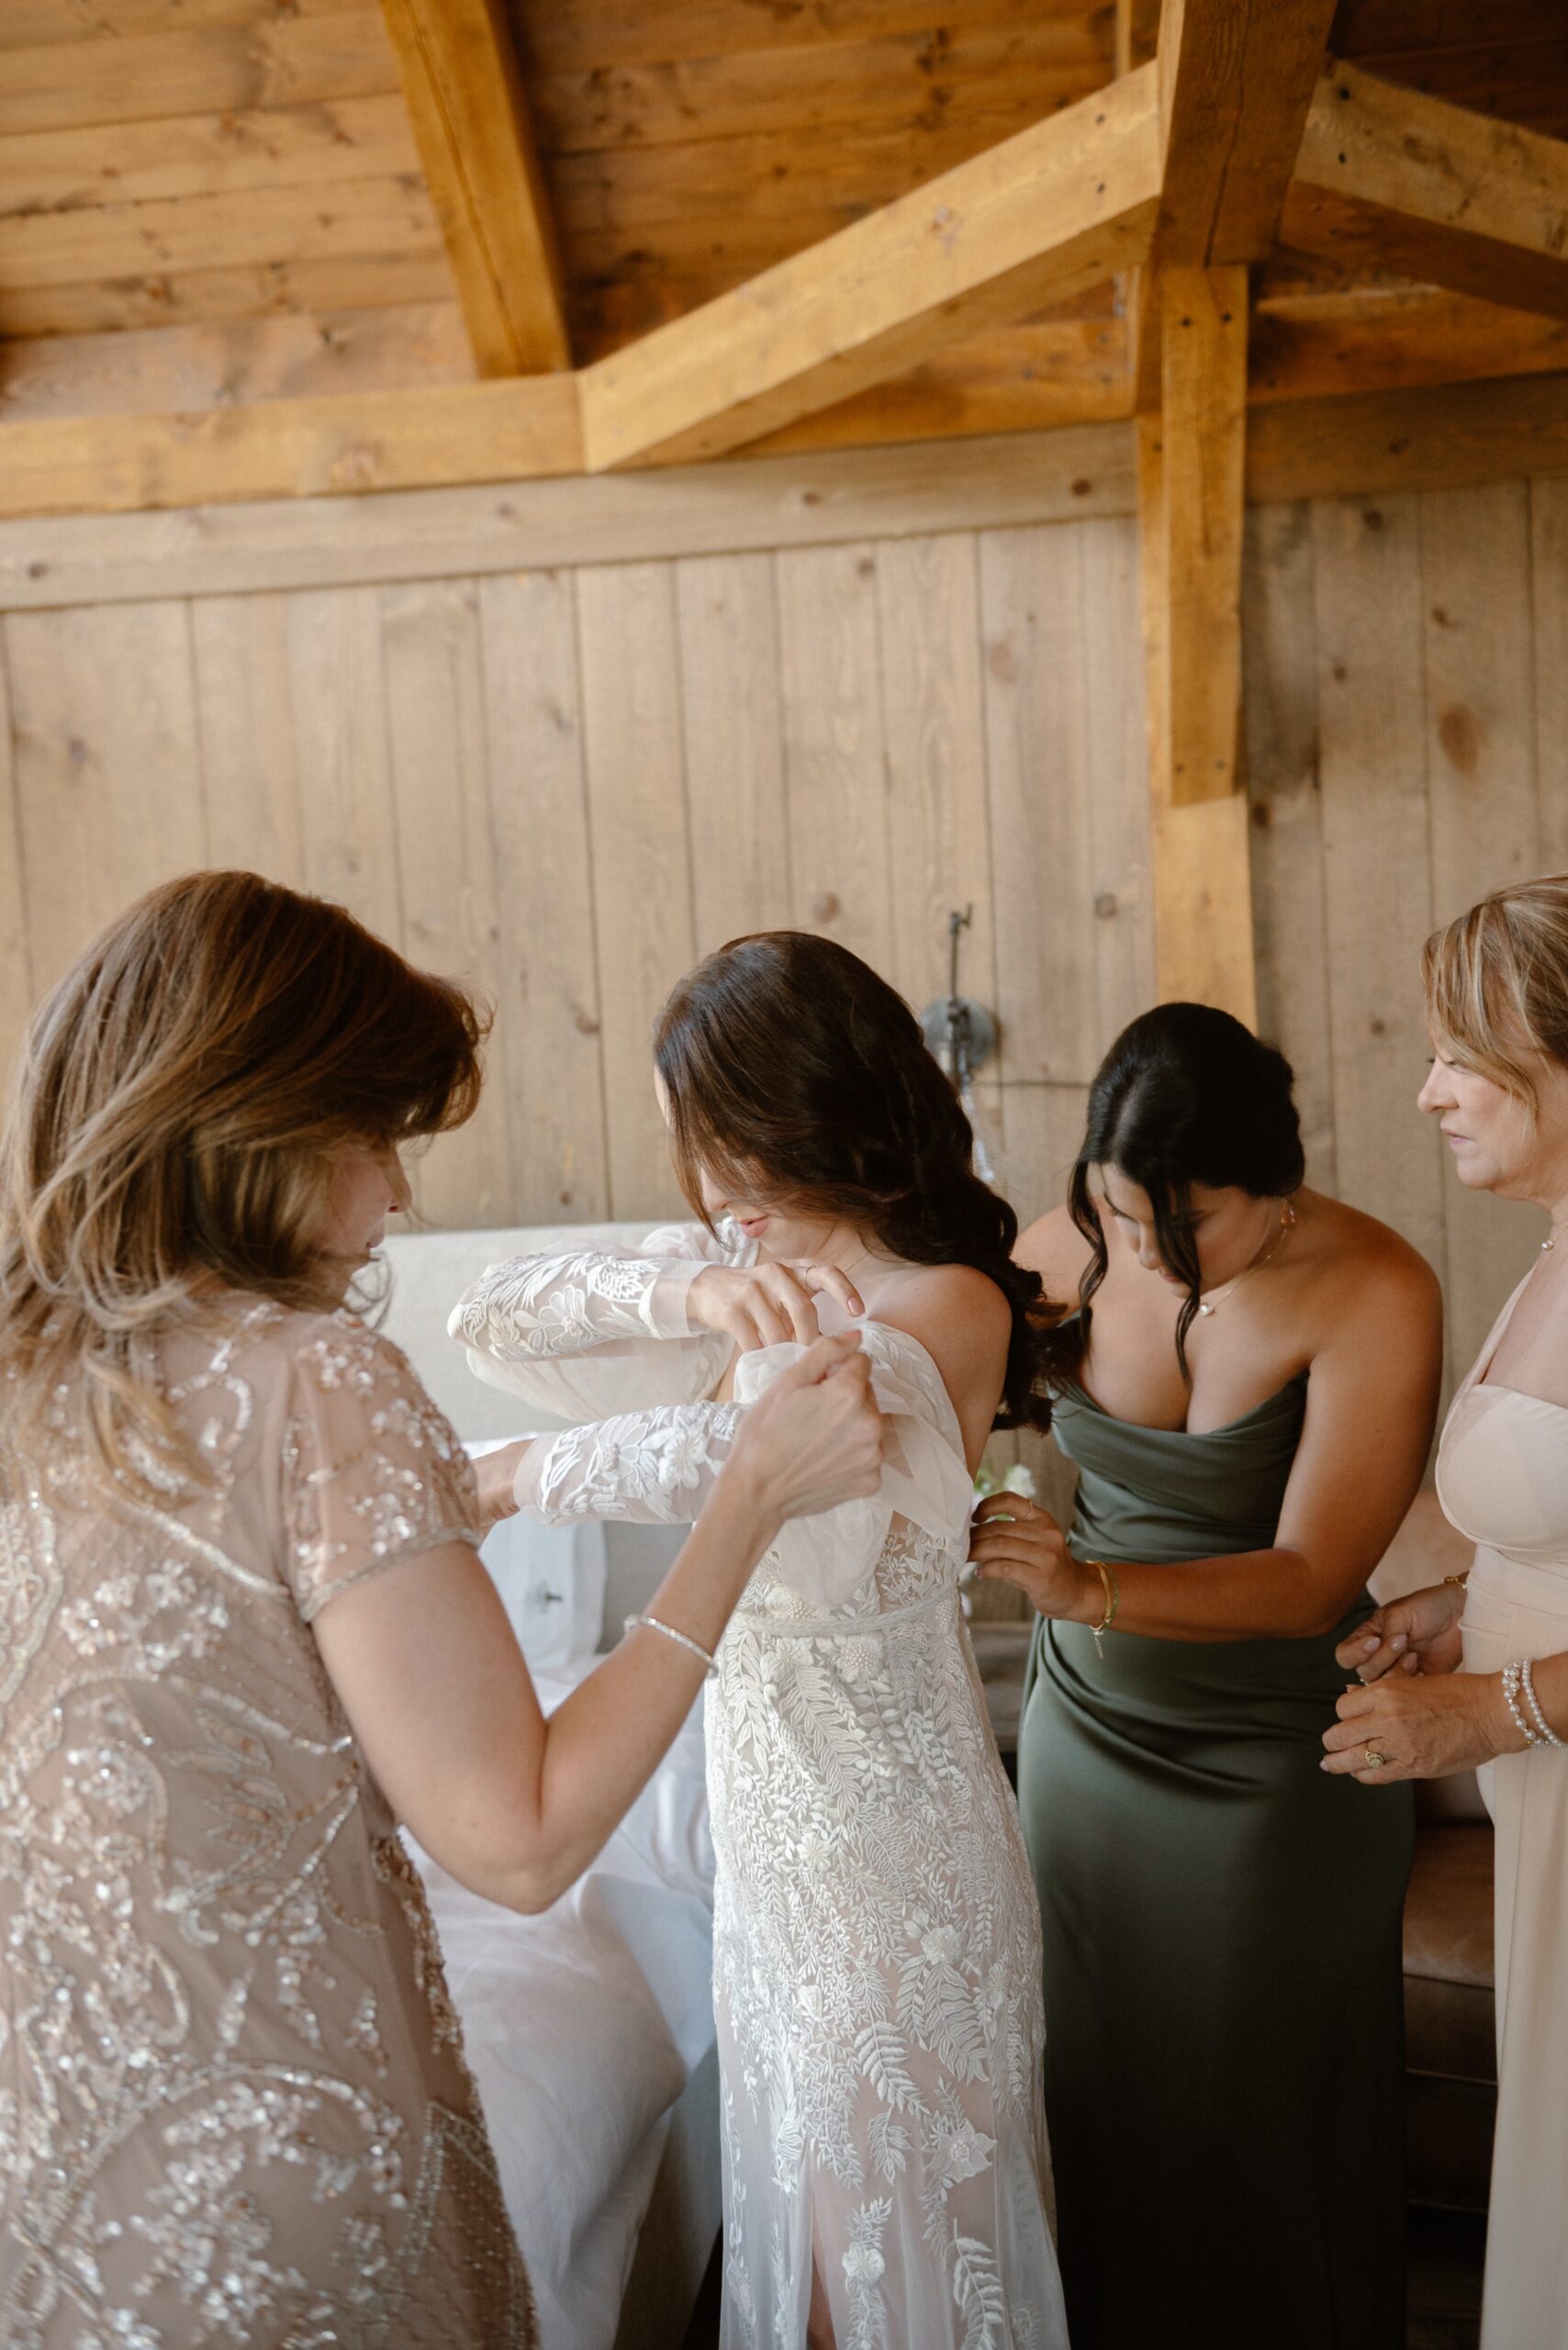 Bride Jessica gets in her wedding dress with the help of her family members at Three Peaks Ranch. Photo by Ashley Joyce.